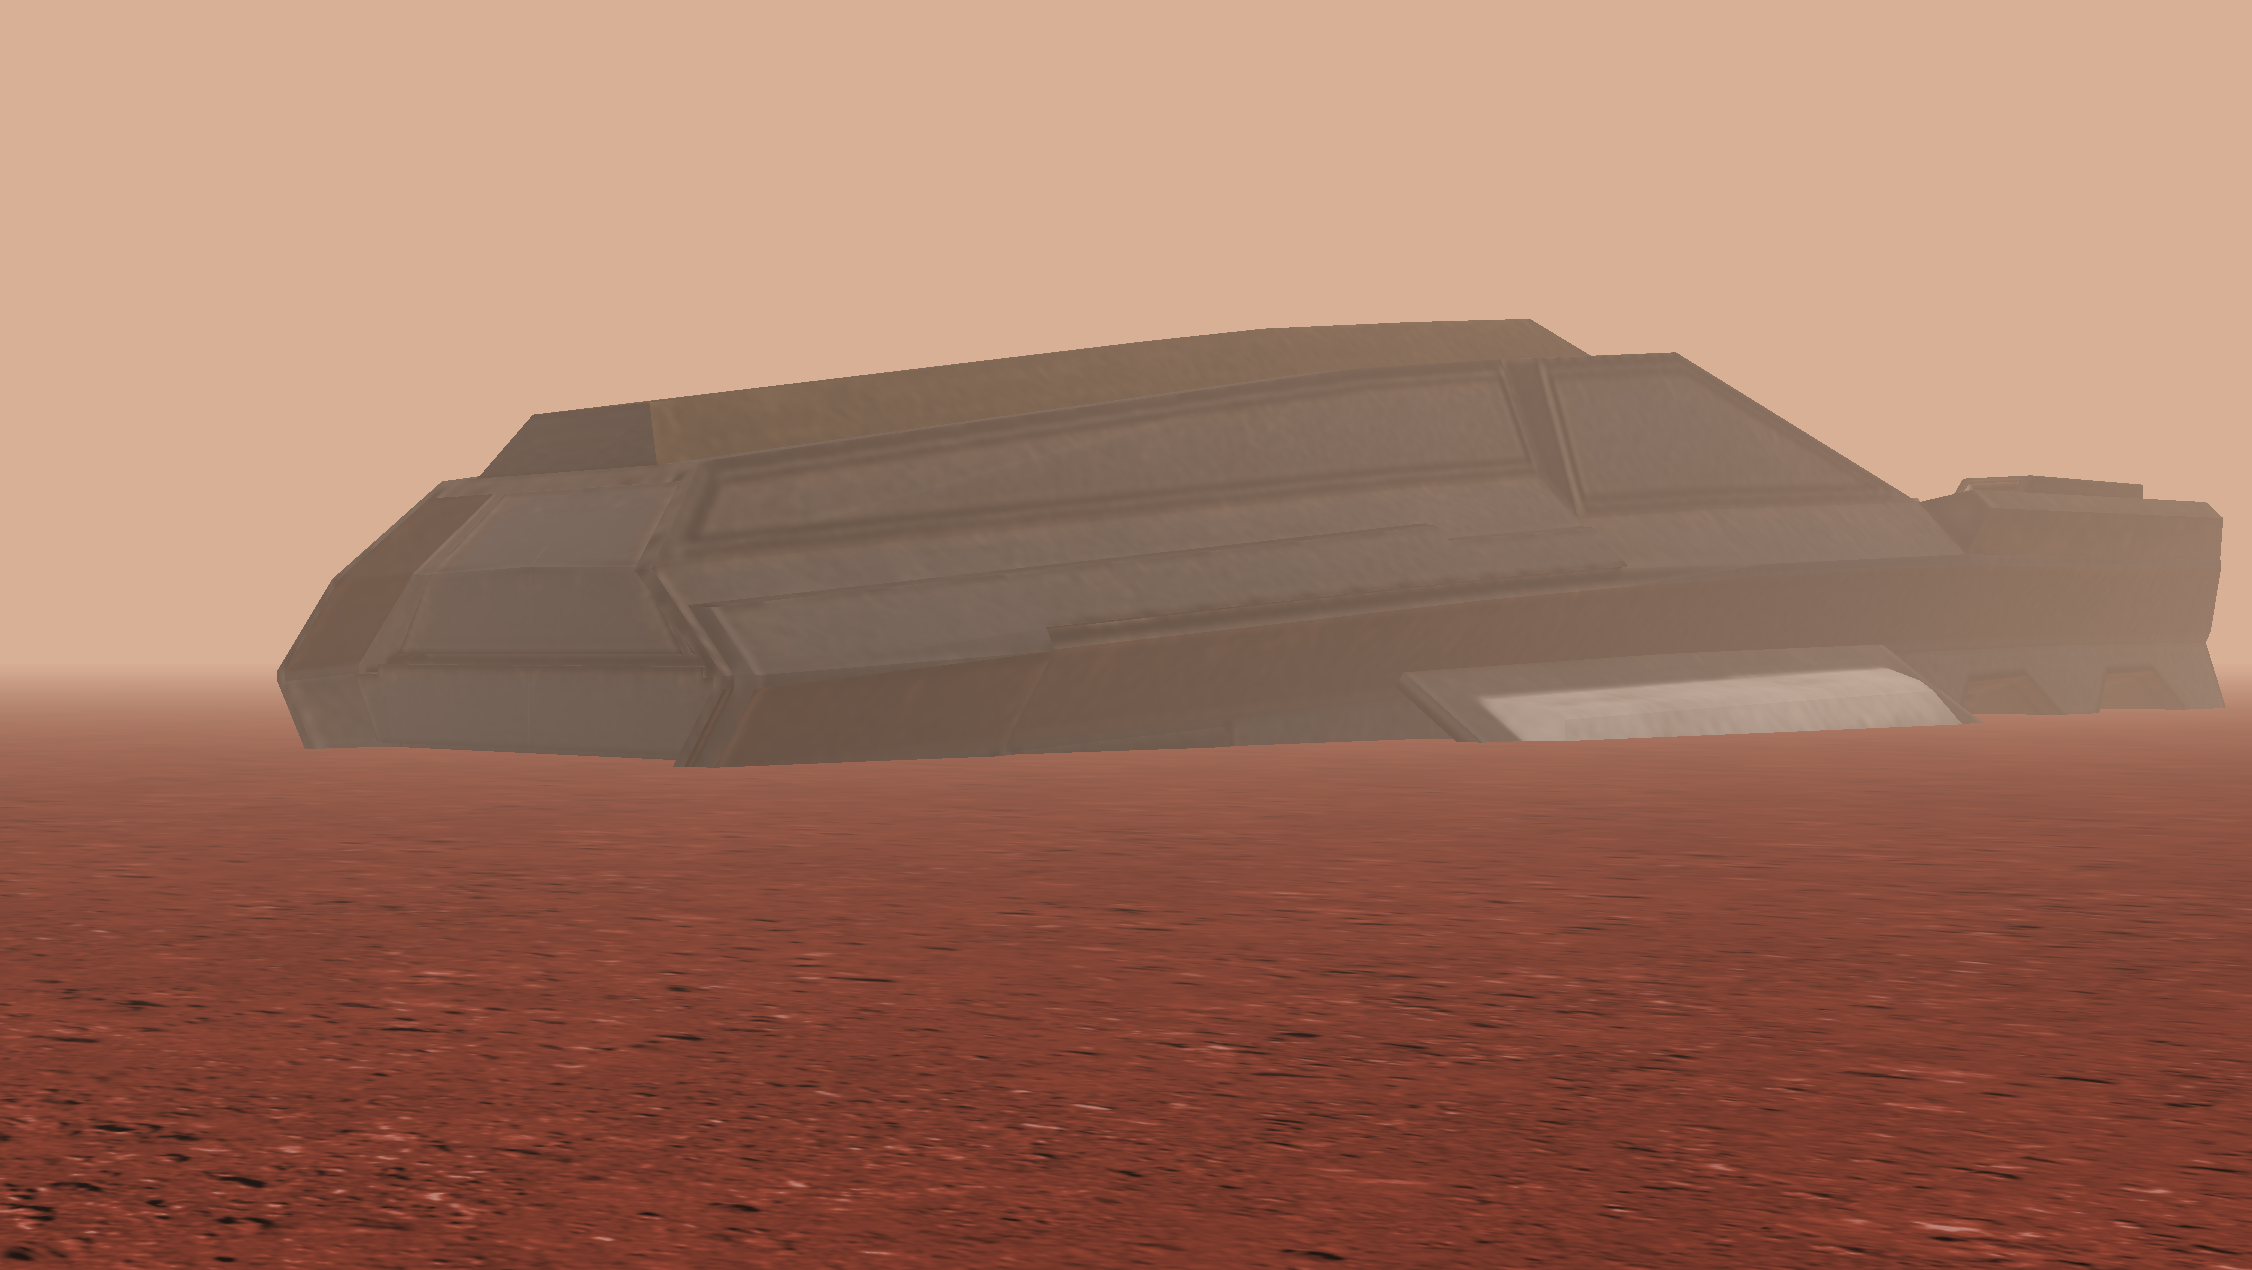 View of the spaceship as seen from the rover